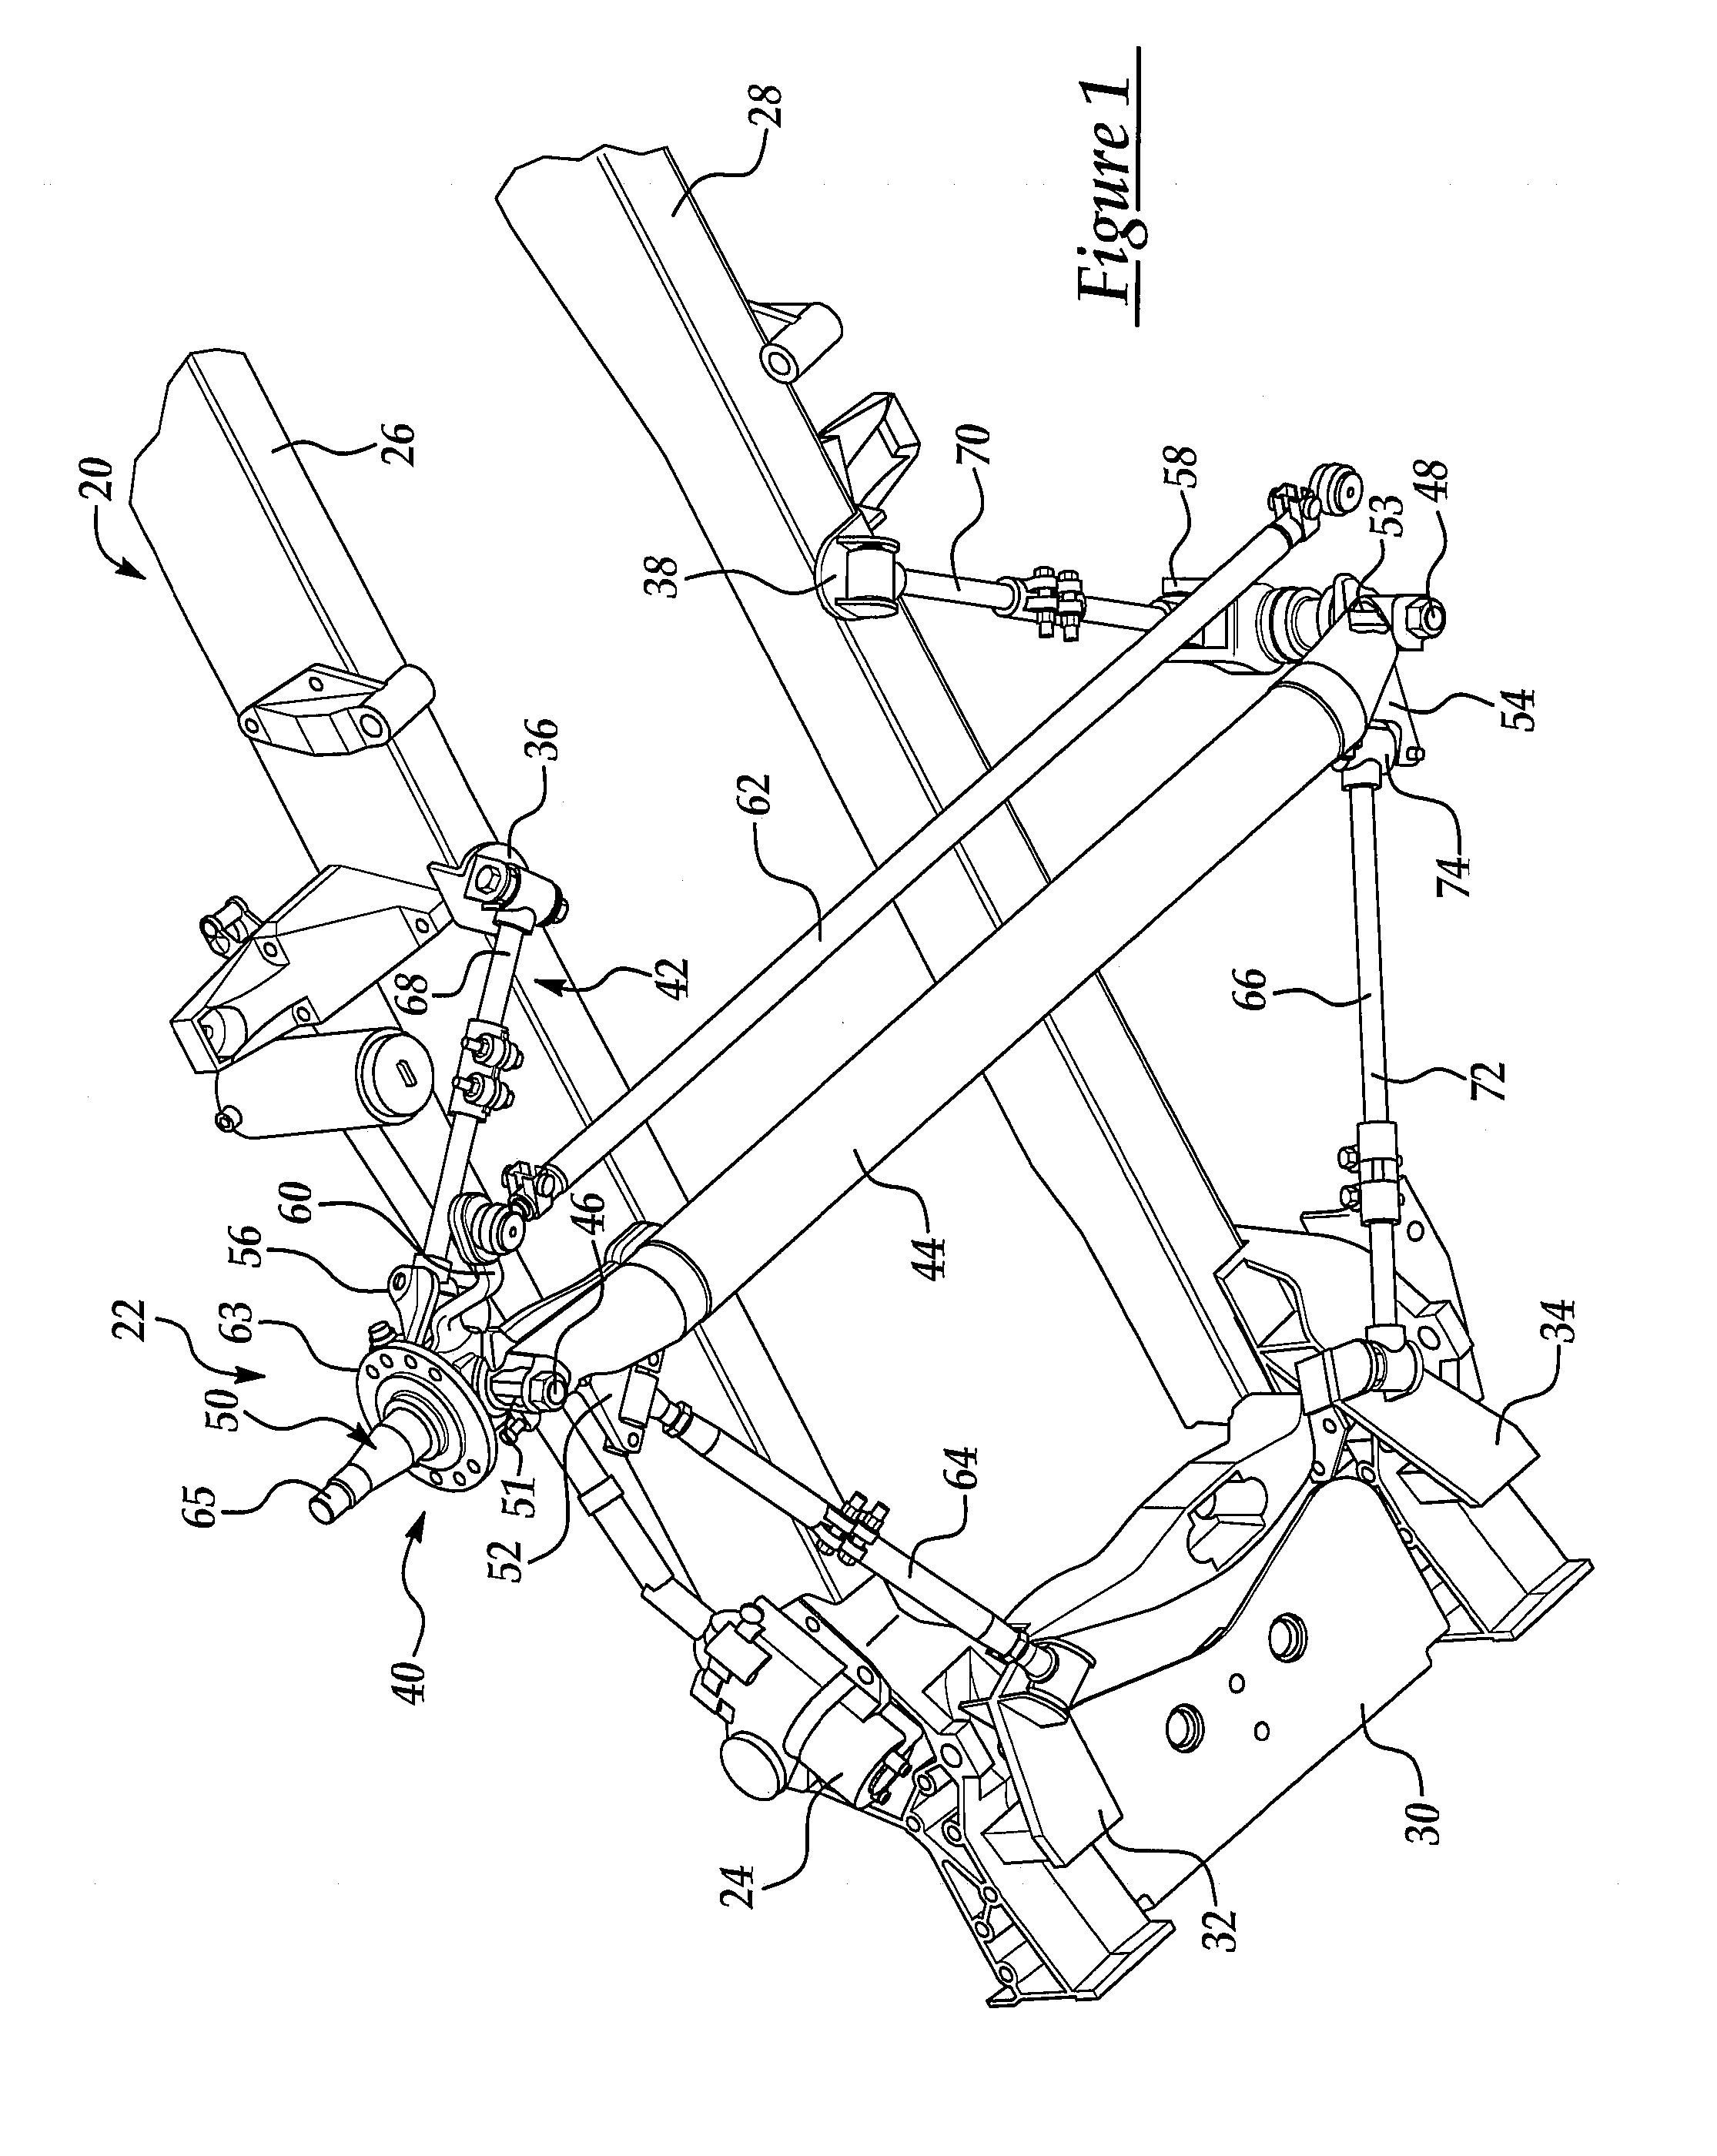 Beam axle suspension with diagonal link